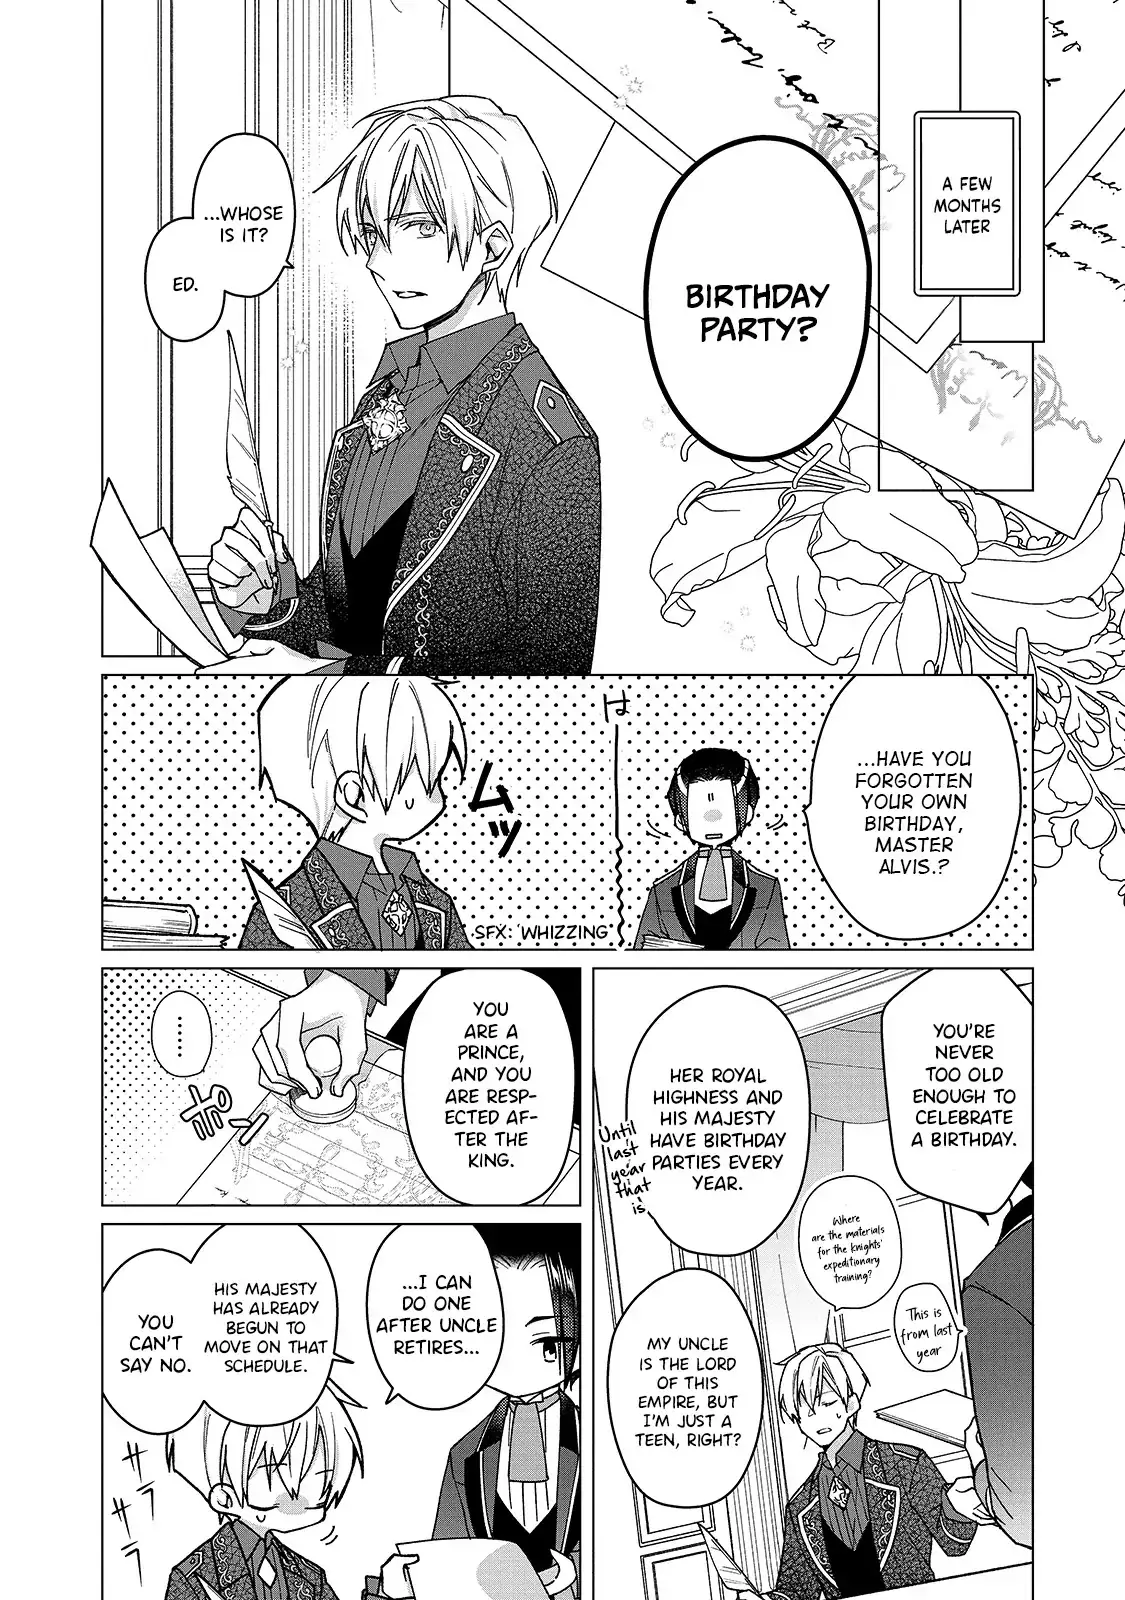 The Rubelia Kingdom’S Tale ~ I Ended Up Cleaning My Younger Cousin’S Mess ~ - 5 page 6-3300c84d